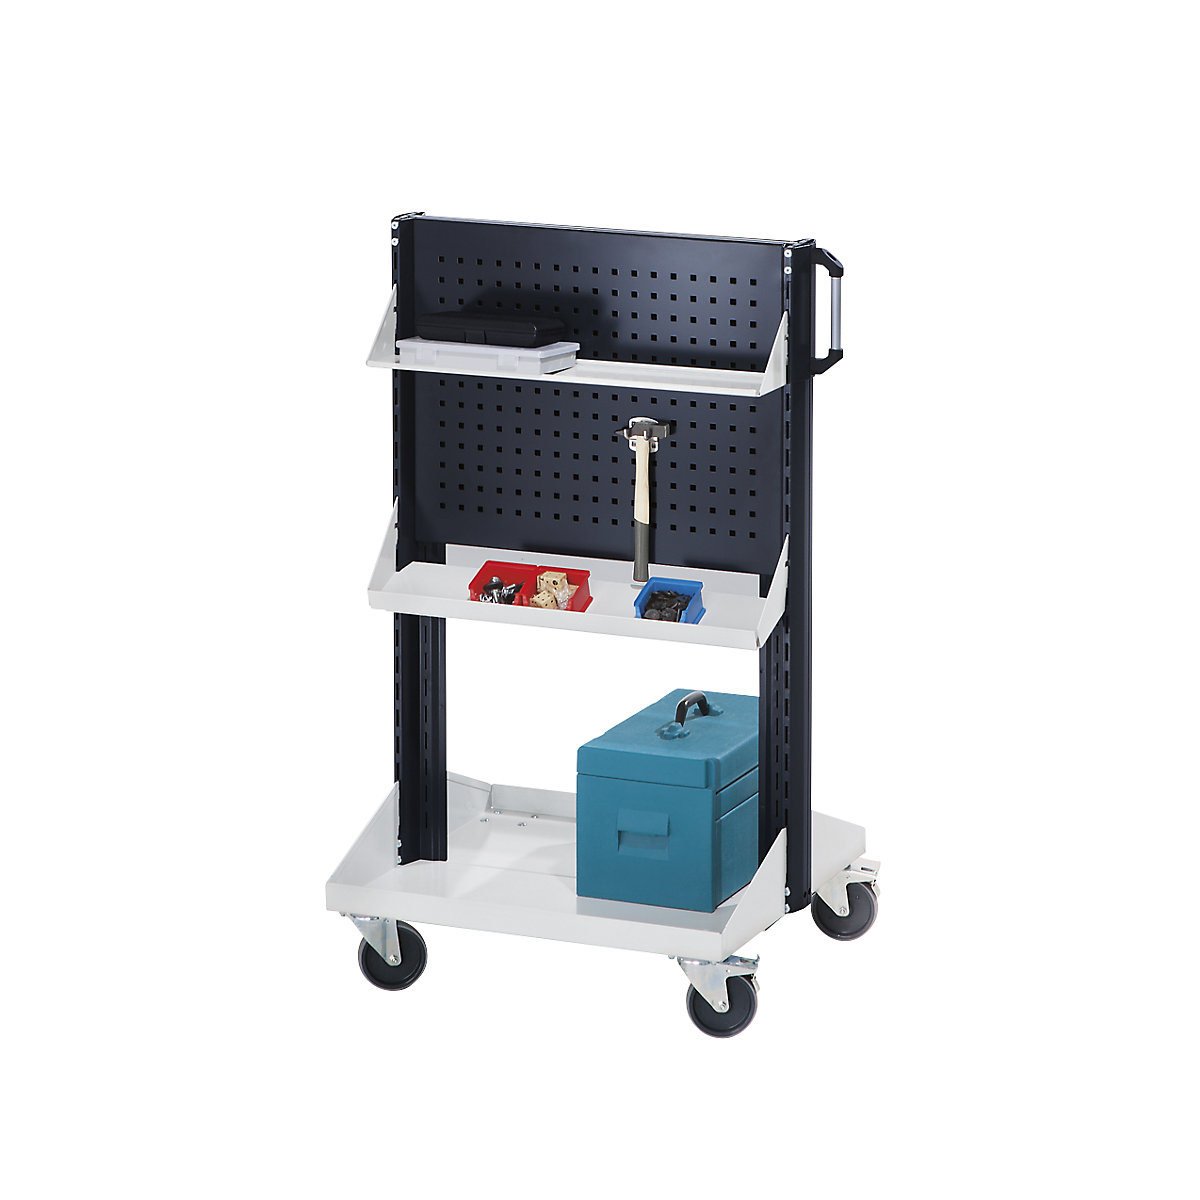 Tool and assembly trolley – ANKE, overall max. load 200 kg, charcoal RAL 7016-1